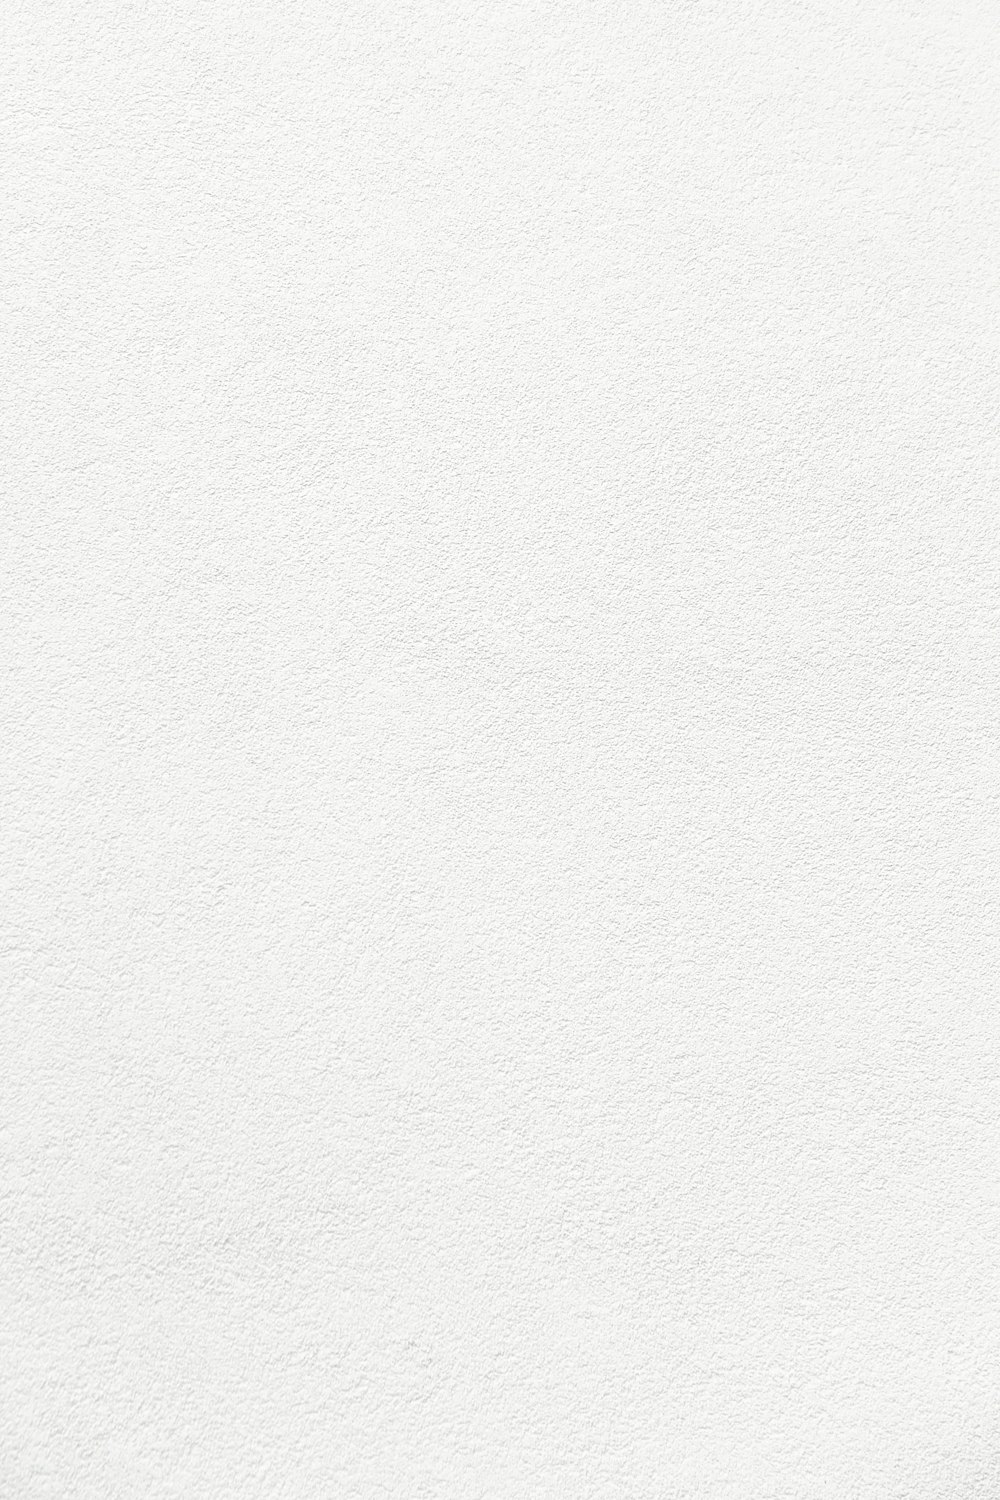 550+ White Texture Pictures  Download Free Images on Unsplash